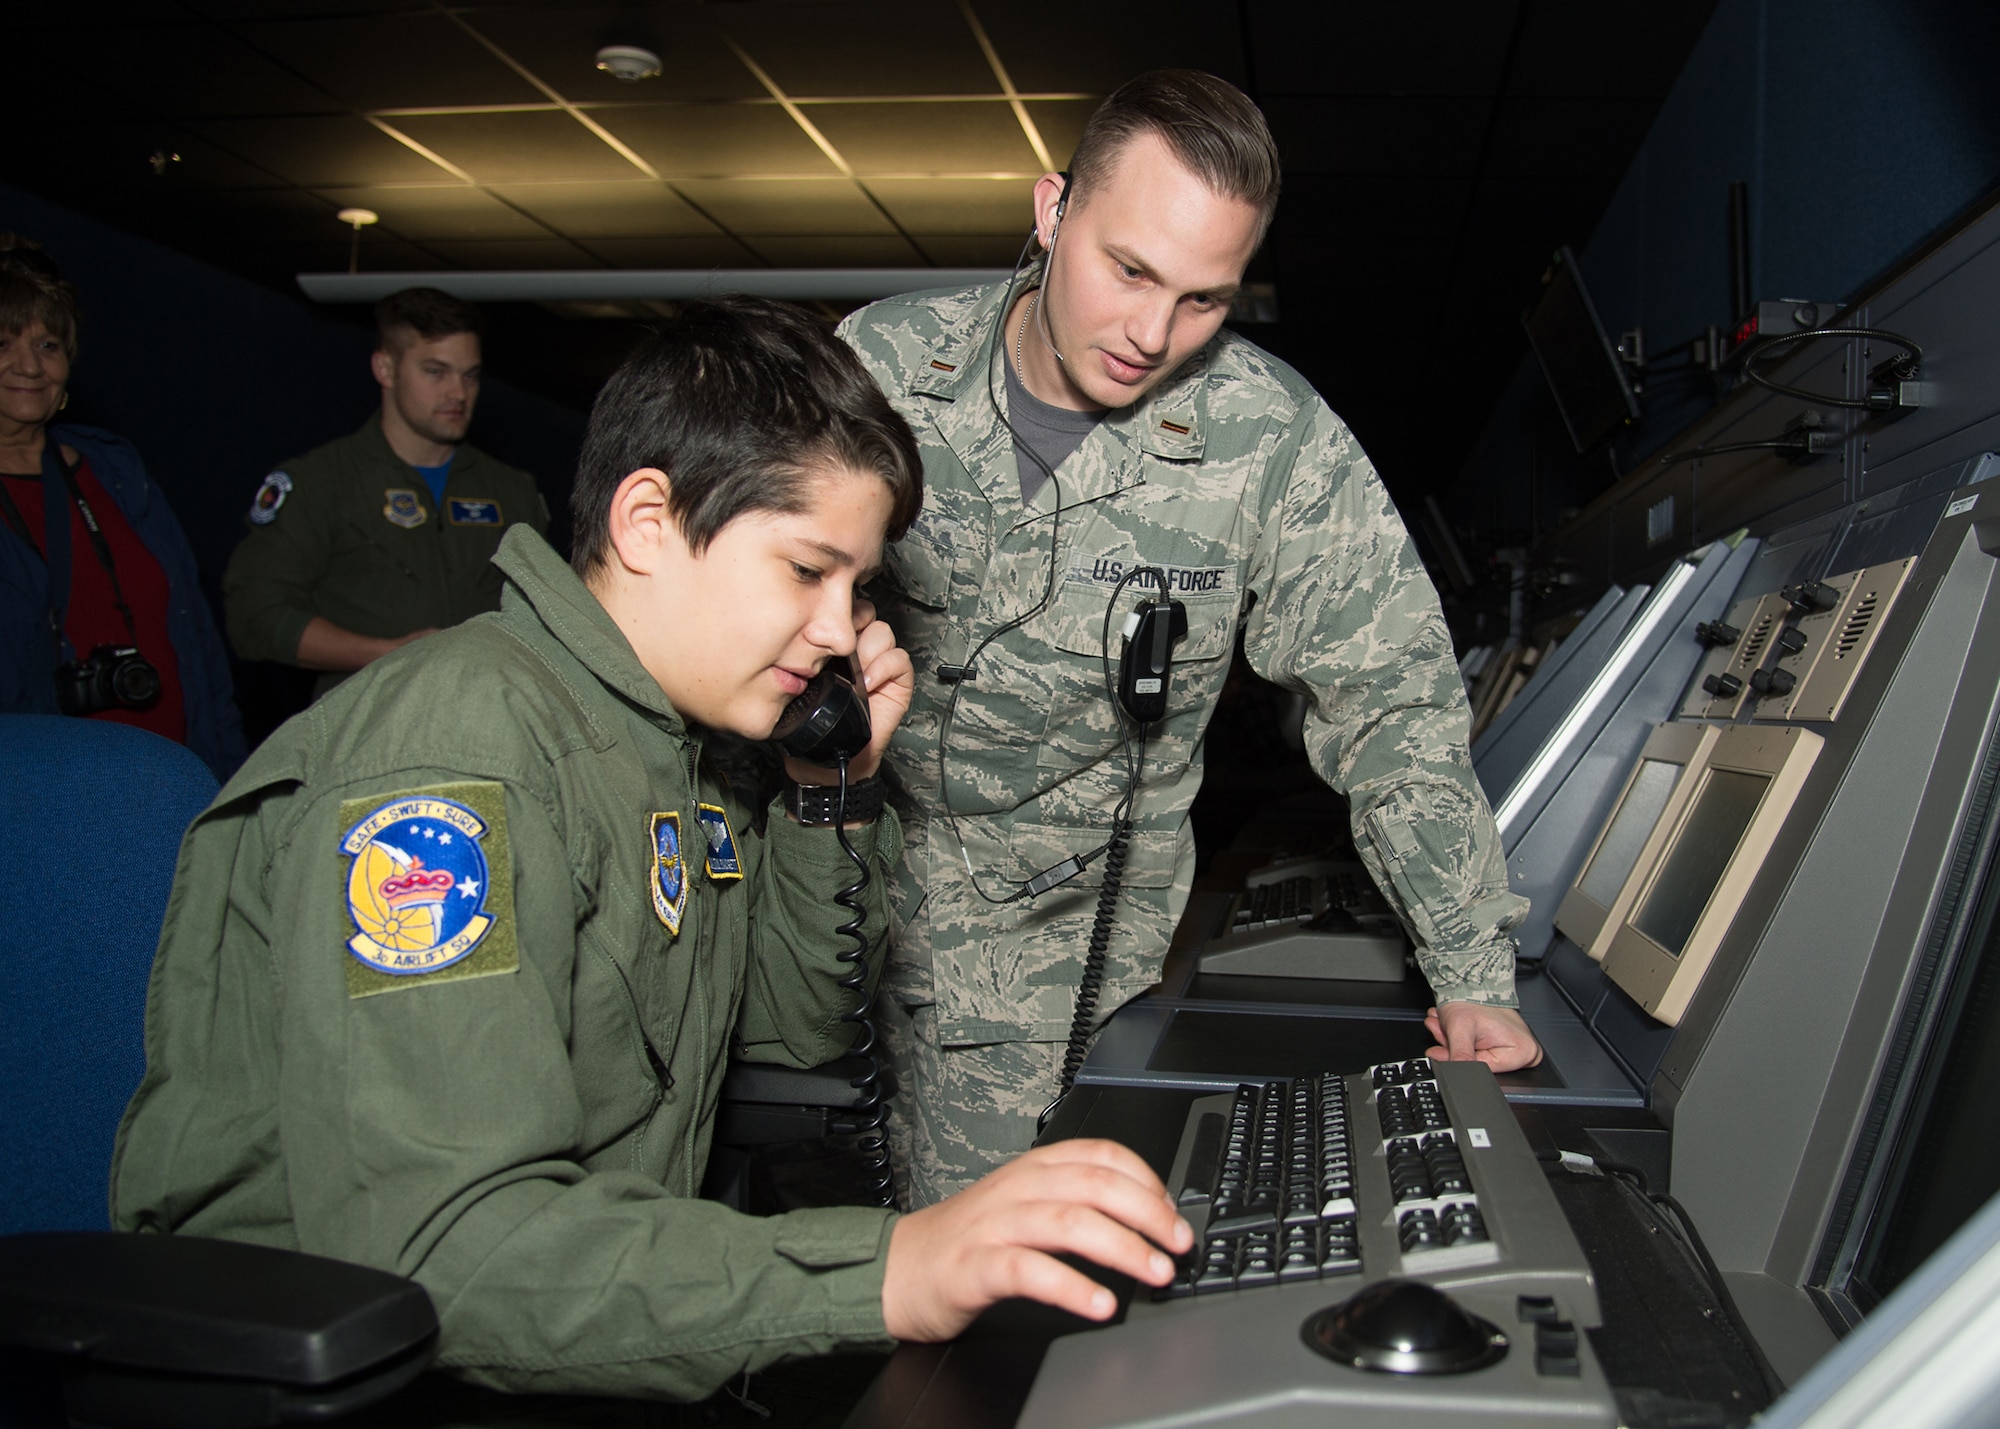 Second Lt. Charles Newman, 436th Operations Support Squadron, shows Dalton Padgett the Radar Approach Control room during his Pilot for a Day tour Mar. 3, 2017, at Dover Air Force Base, Del. Padgett was able to track aircraft location, altitude, speed, as well as learn how they are vectored for approach. (U.S. Air Force photo by Mauricio Campino)